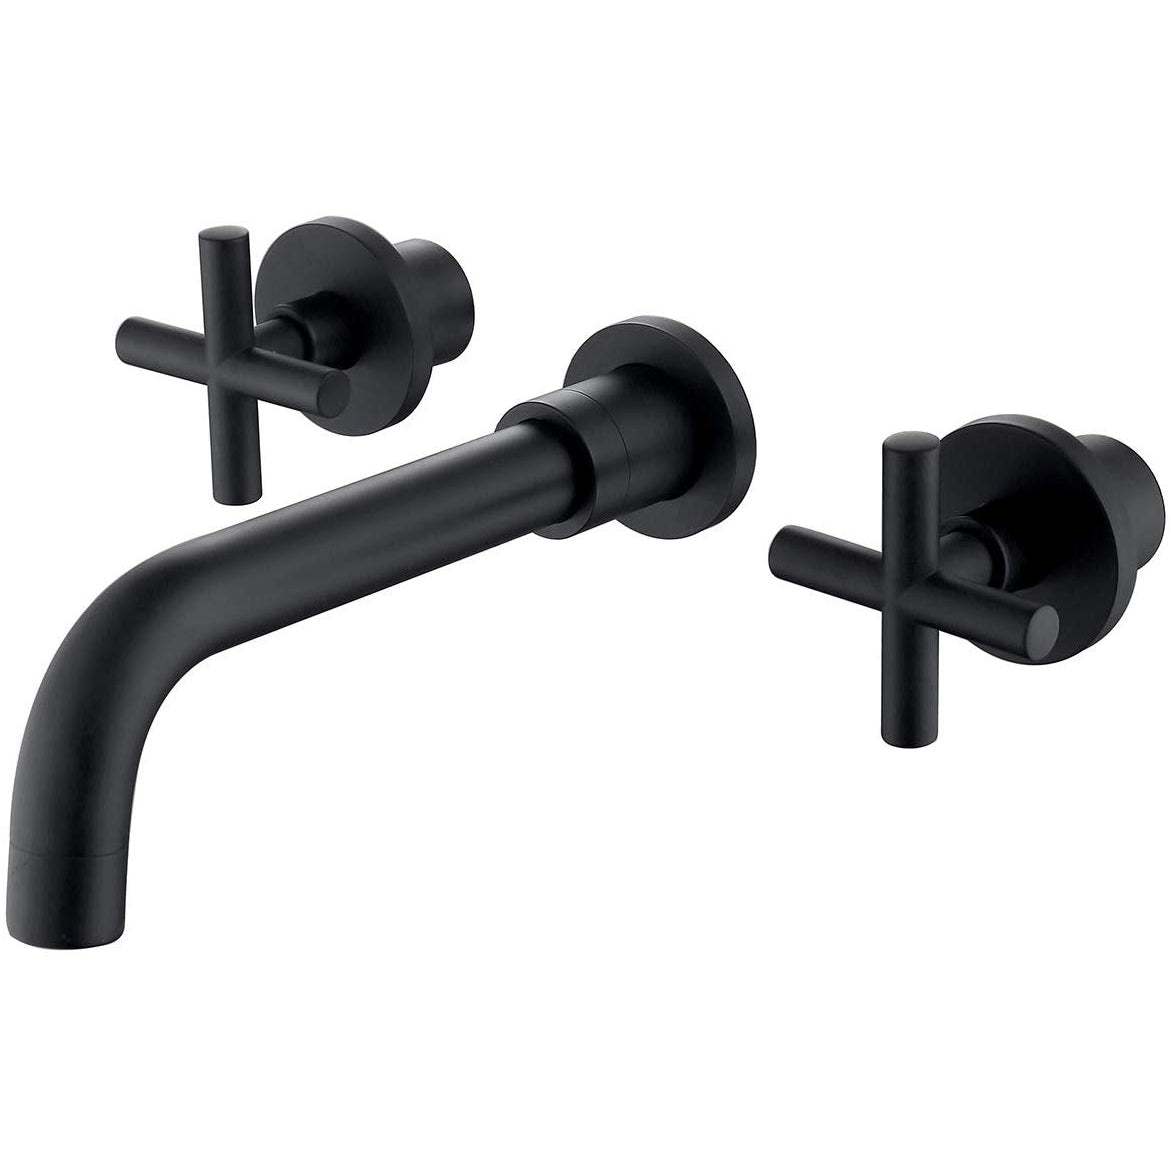 Boyel Living Double Handle Wall Mounted Bathroom Kitchen Faucet Basin Mixer Taps in Matte Black with Rough-in Valve-Boyel Living